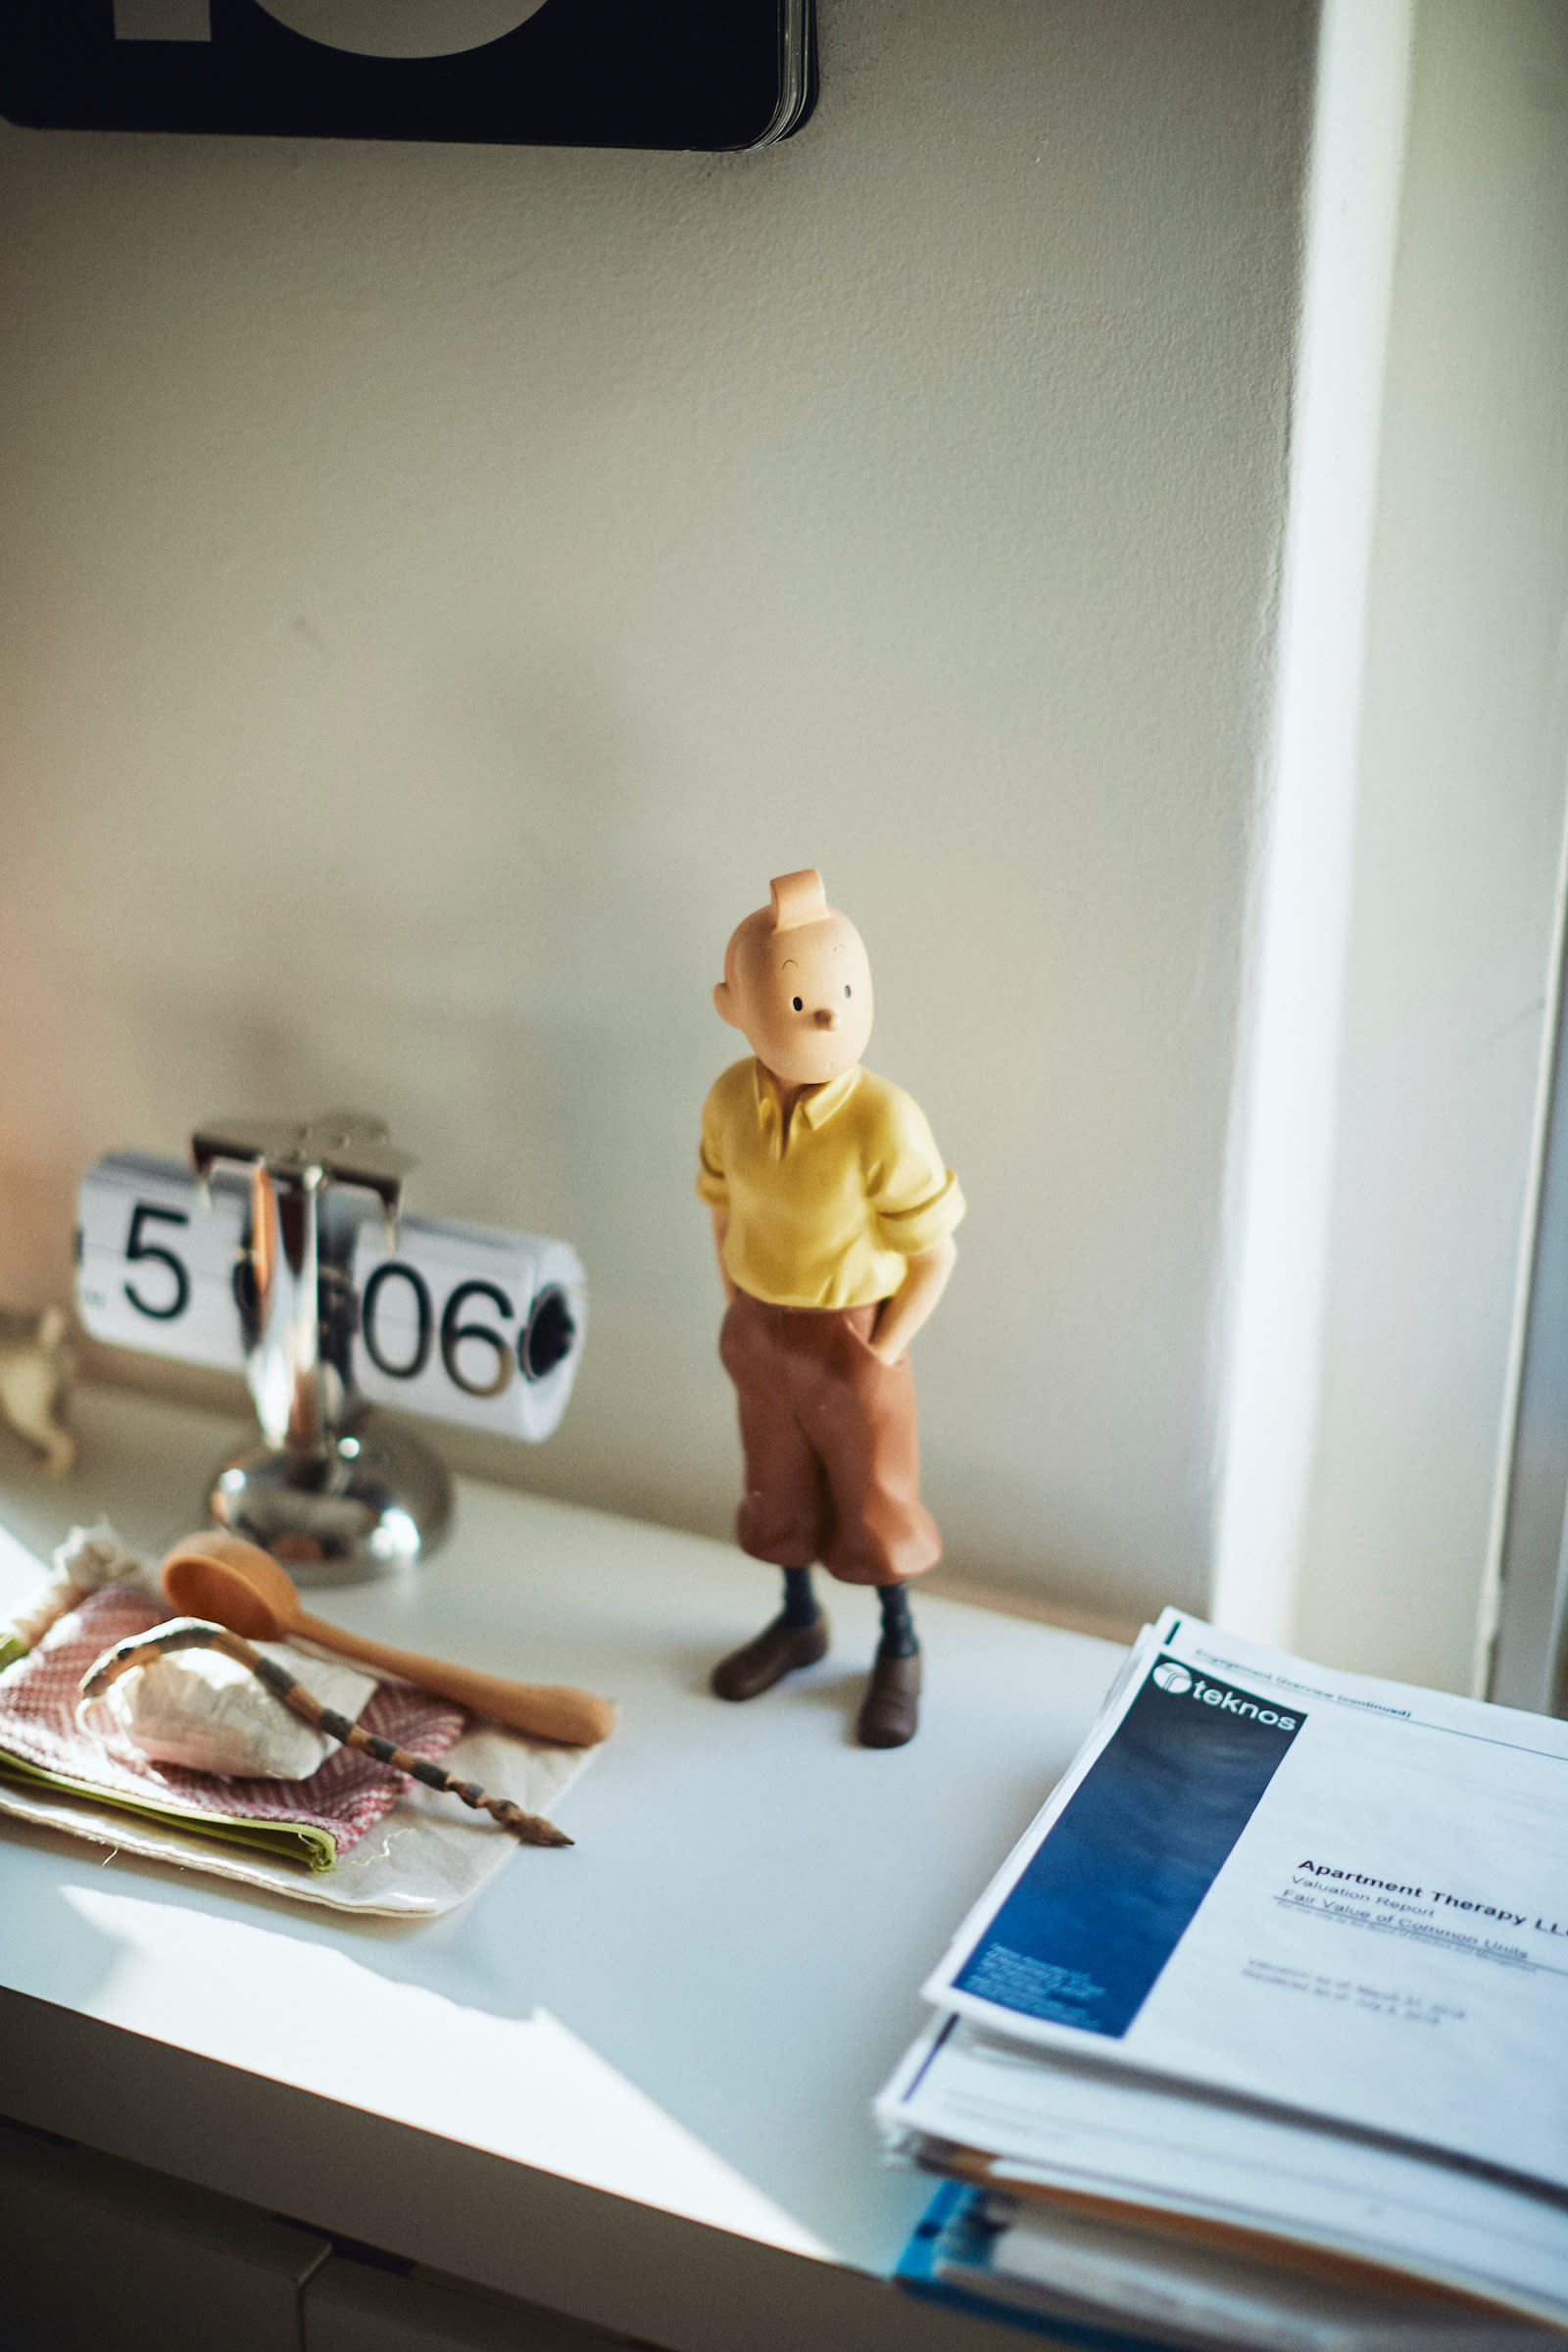 A figurine of the character Tin Tin at Apartment Therapy